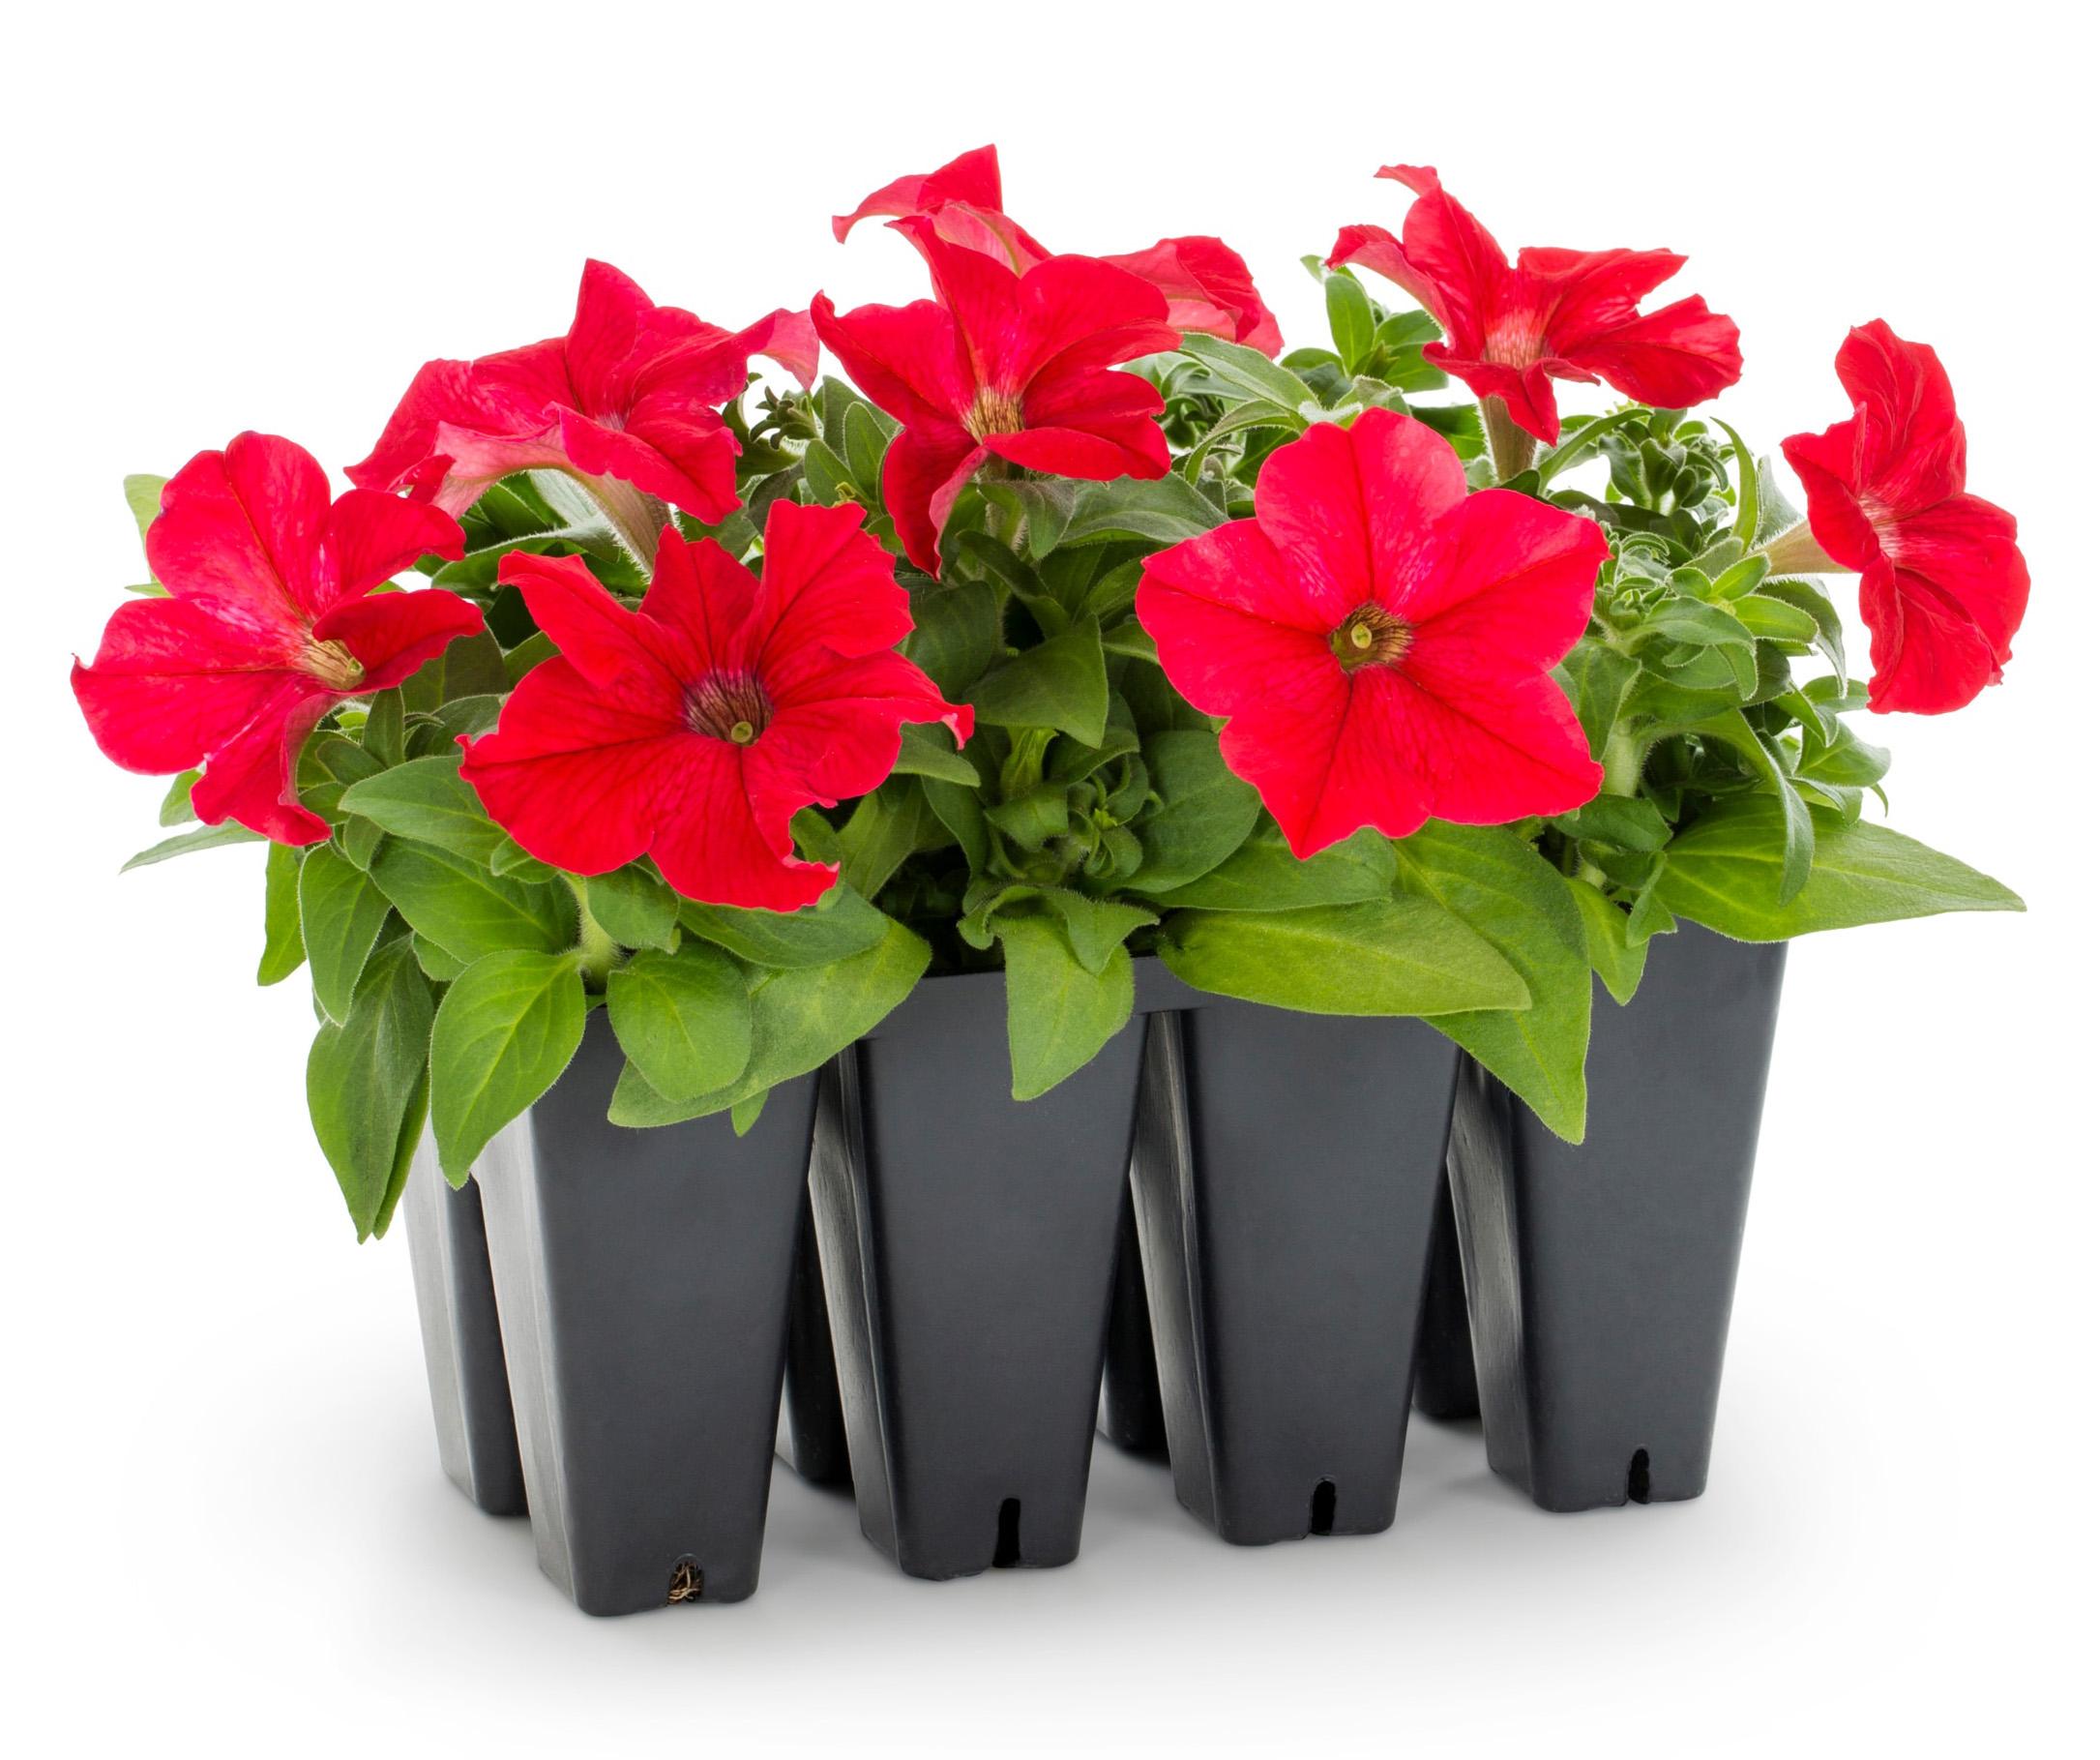 Free Annual Plant for Mothers Day at Lowe's